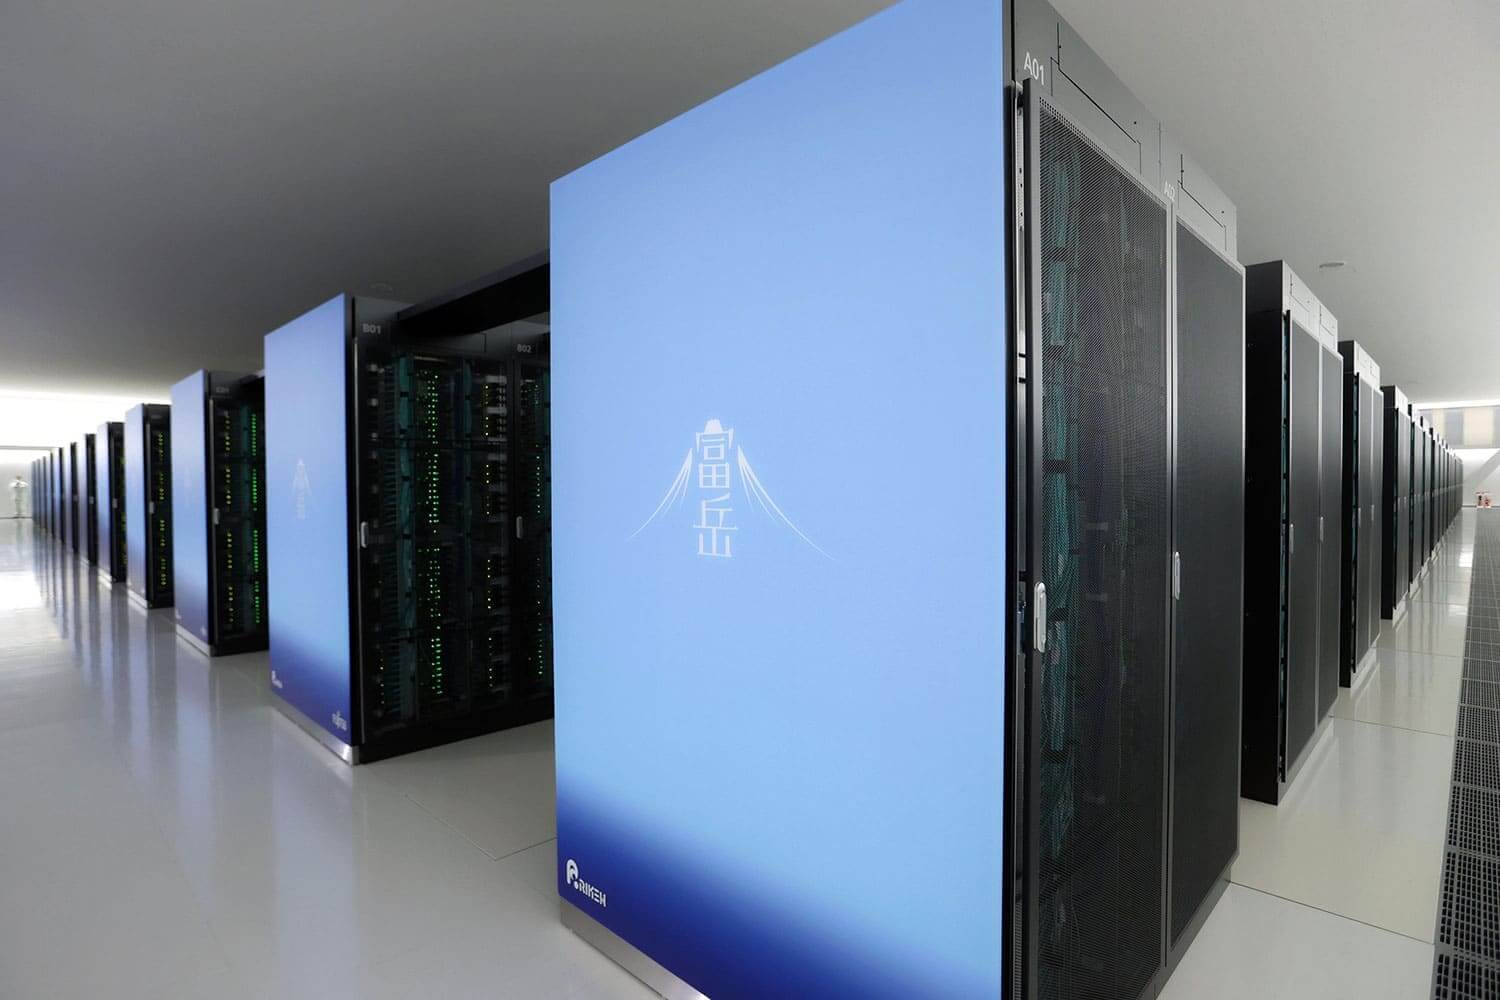 Japan's ARM-based Fugaku is the world's fastest supercomputer